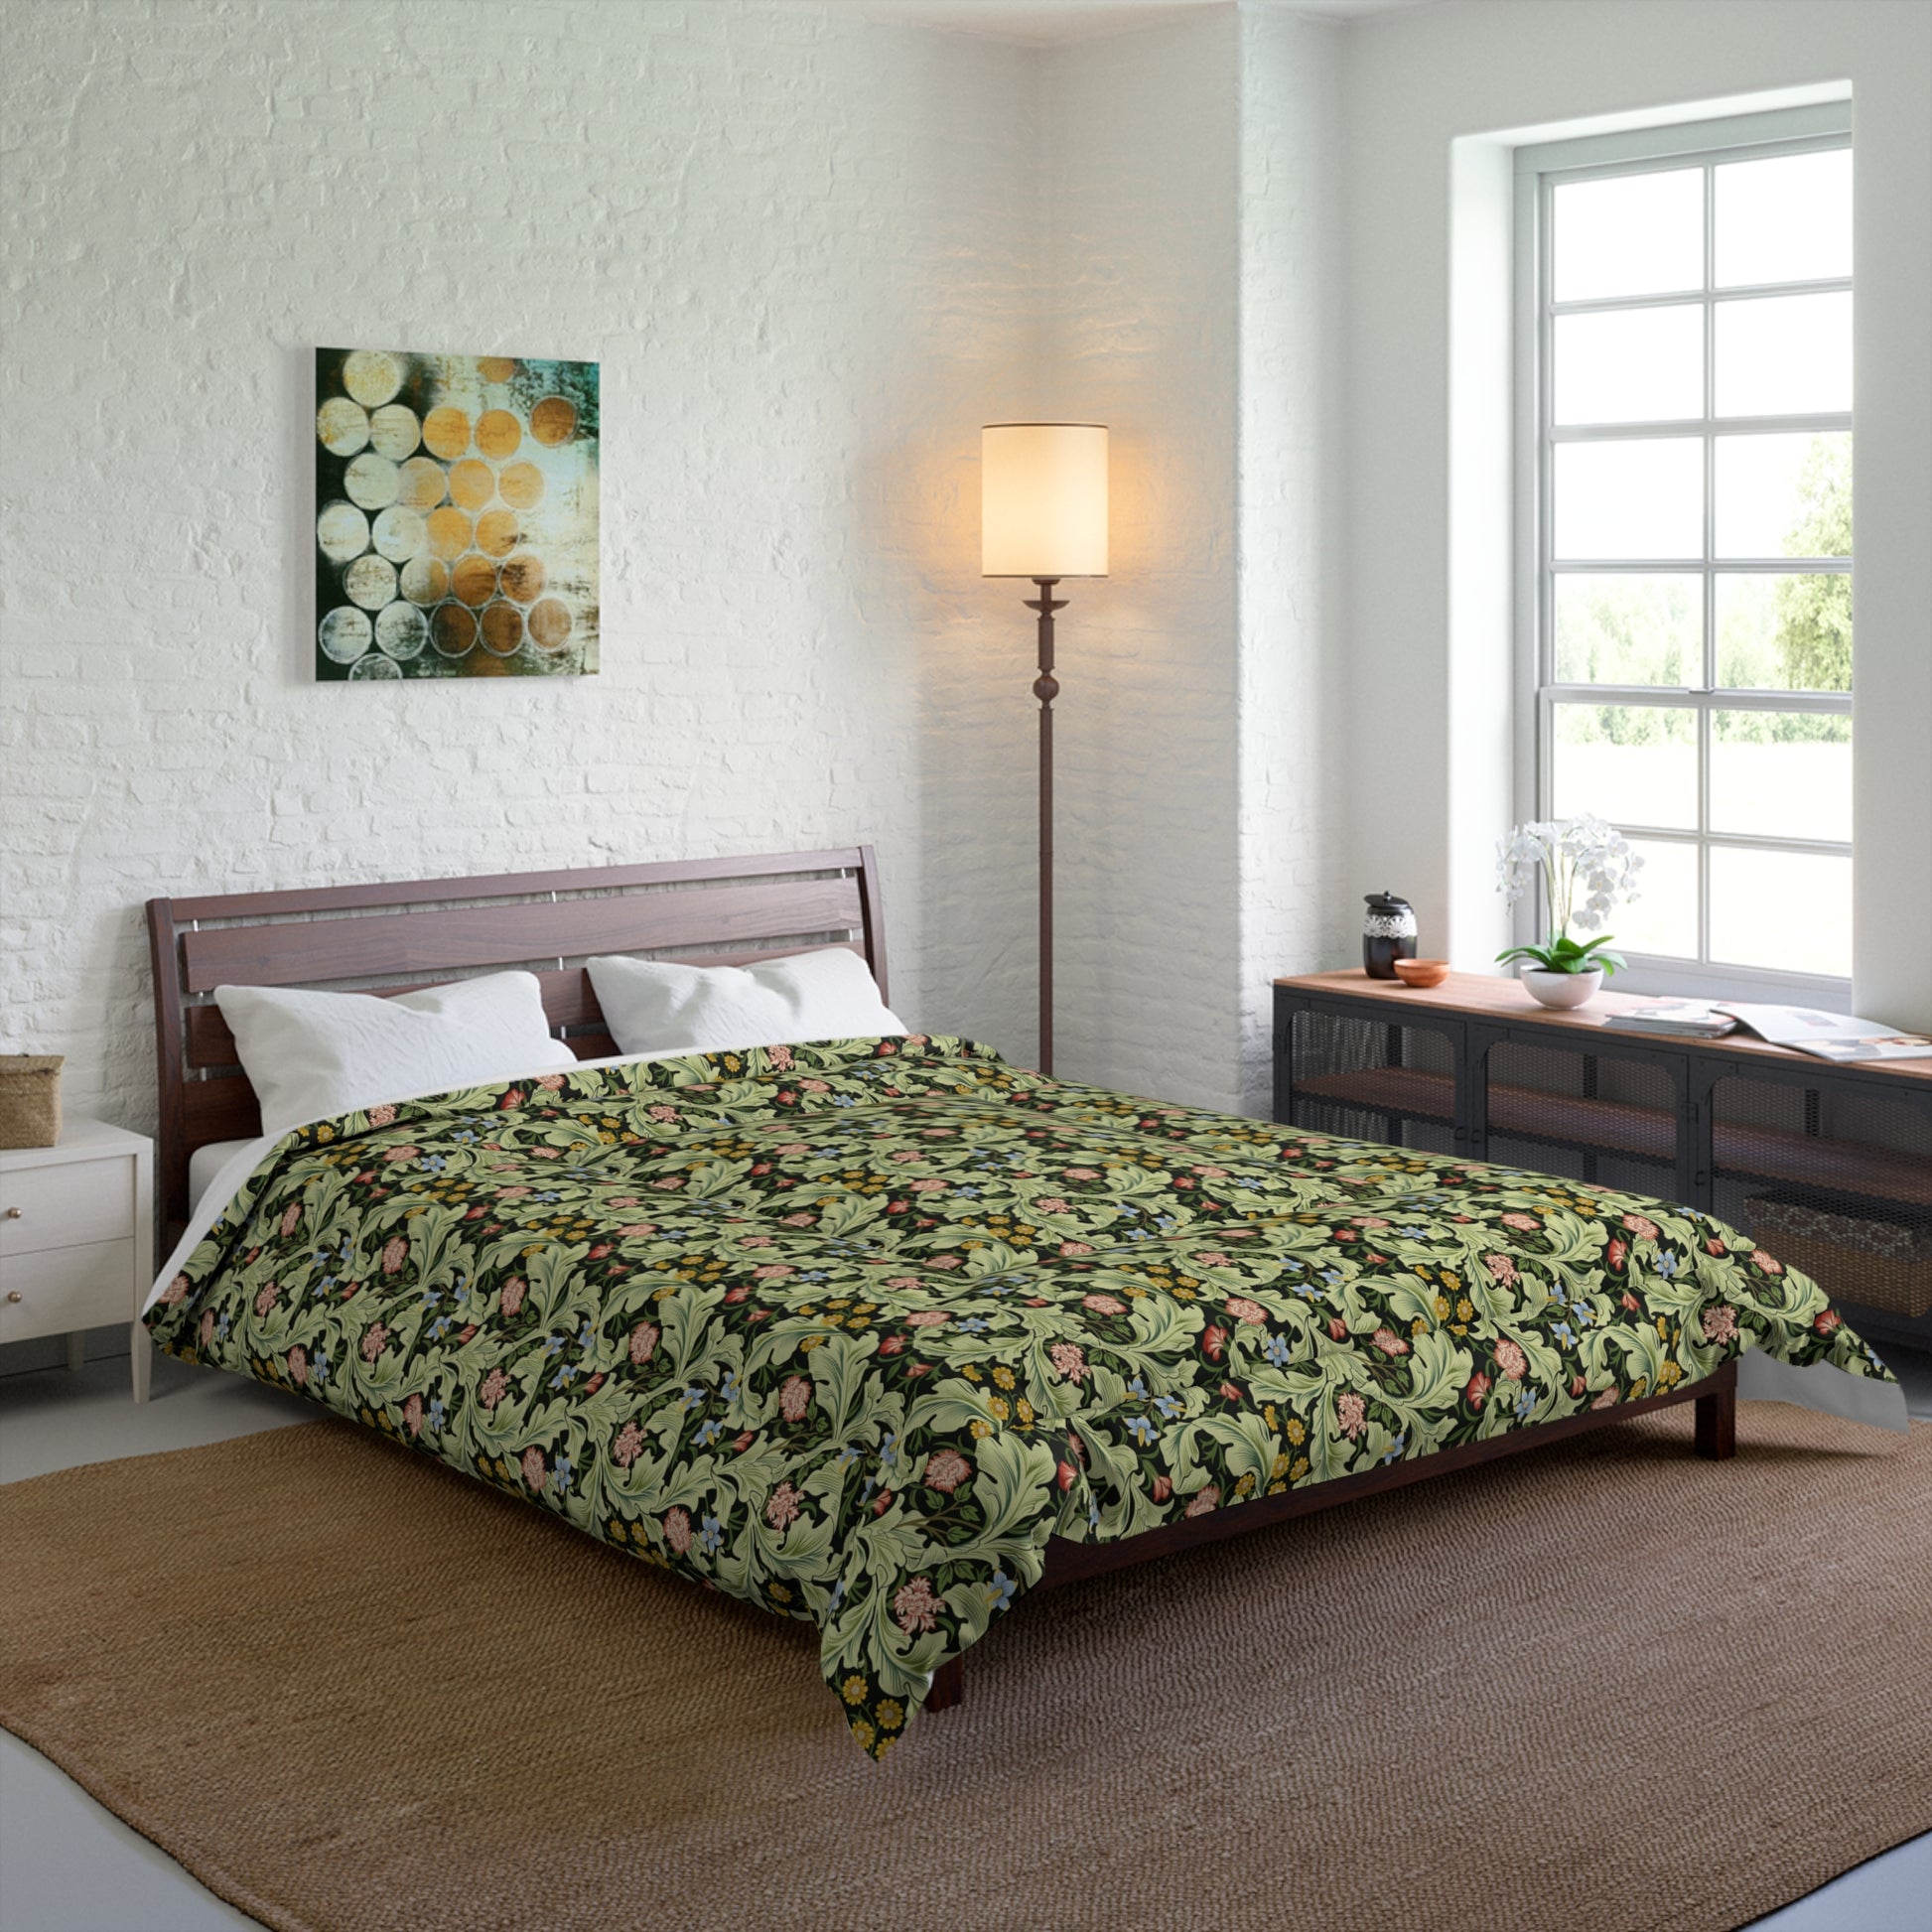 william-morris-co-comforter-leicester-collection-green-1